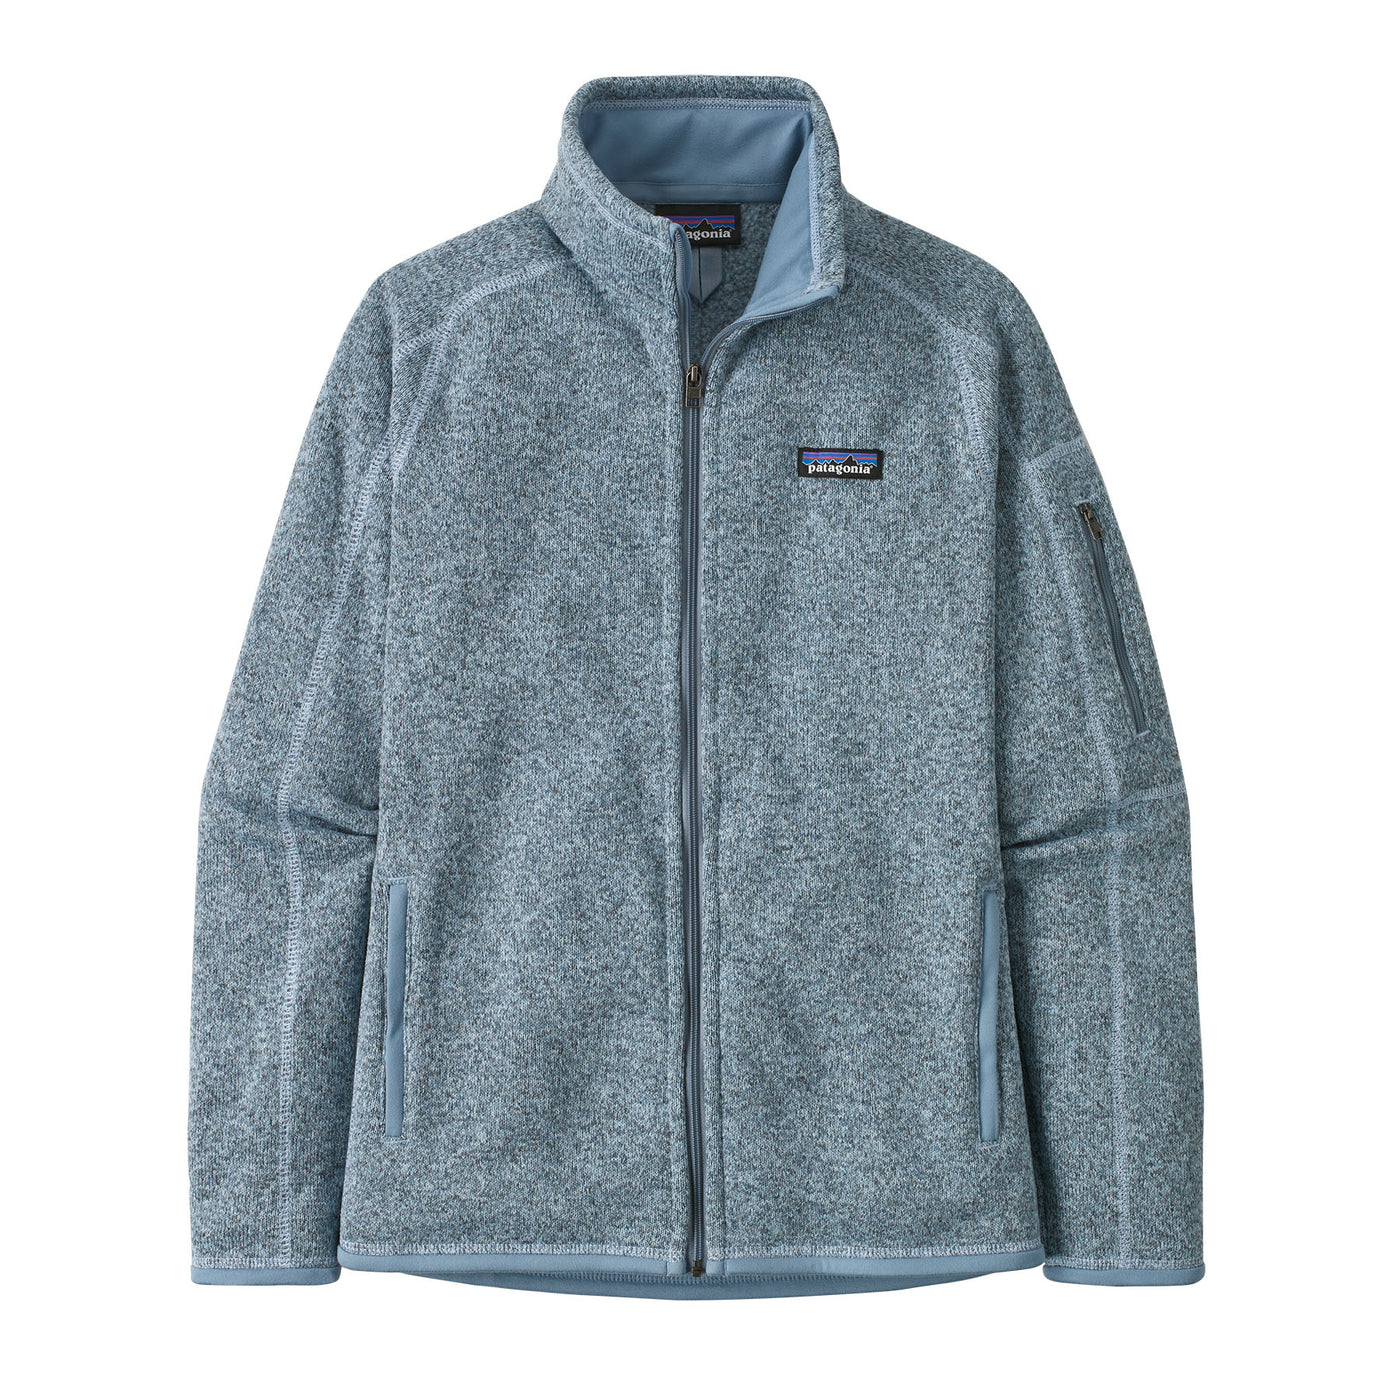 PATAGONIA Women's Better Sweater Jacket team Blue STME / S